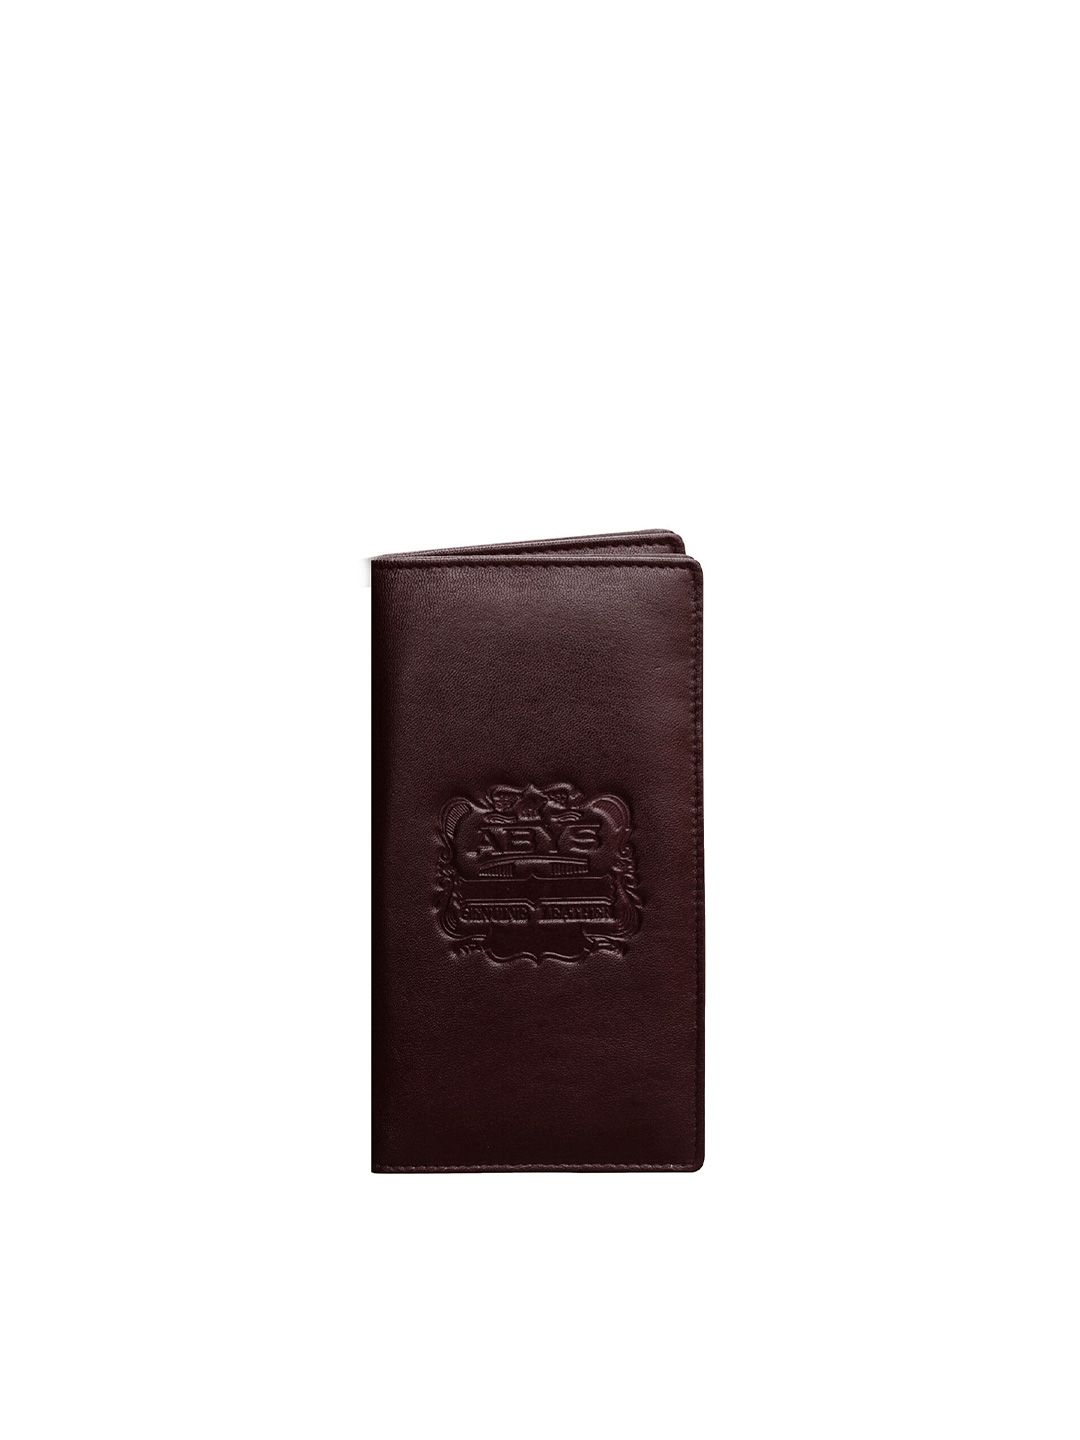 ABYS Unisex Coffee Brown & Black Textured Leather Card Holder Price in India